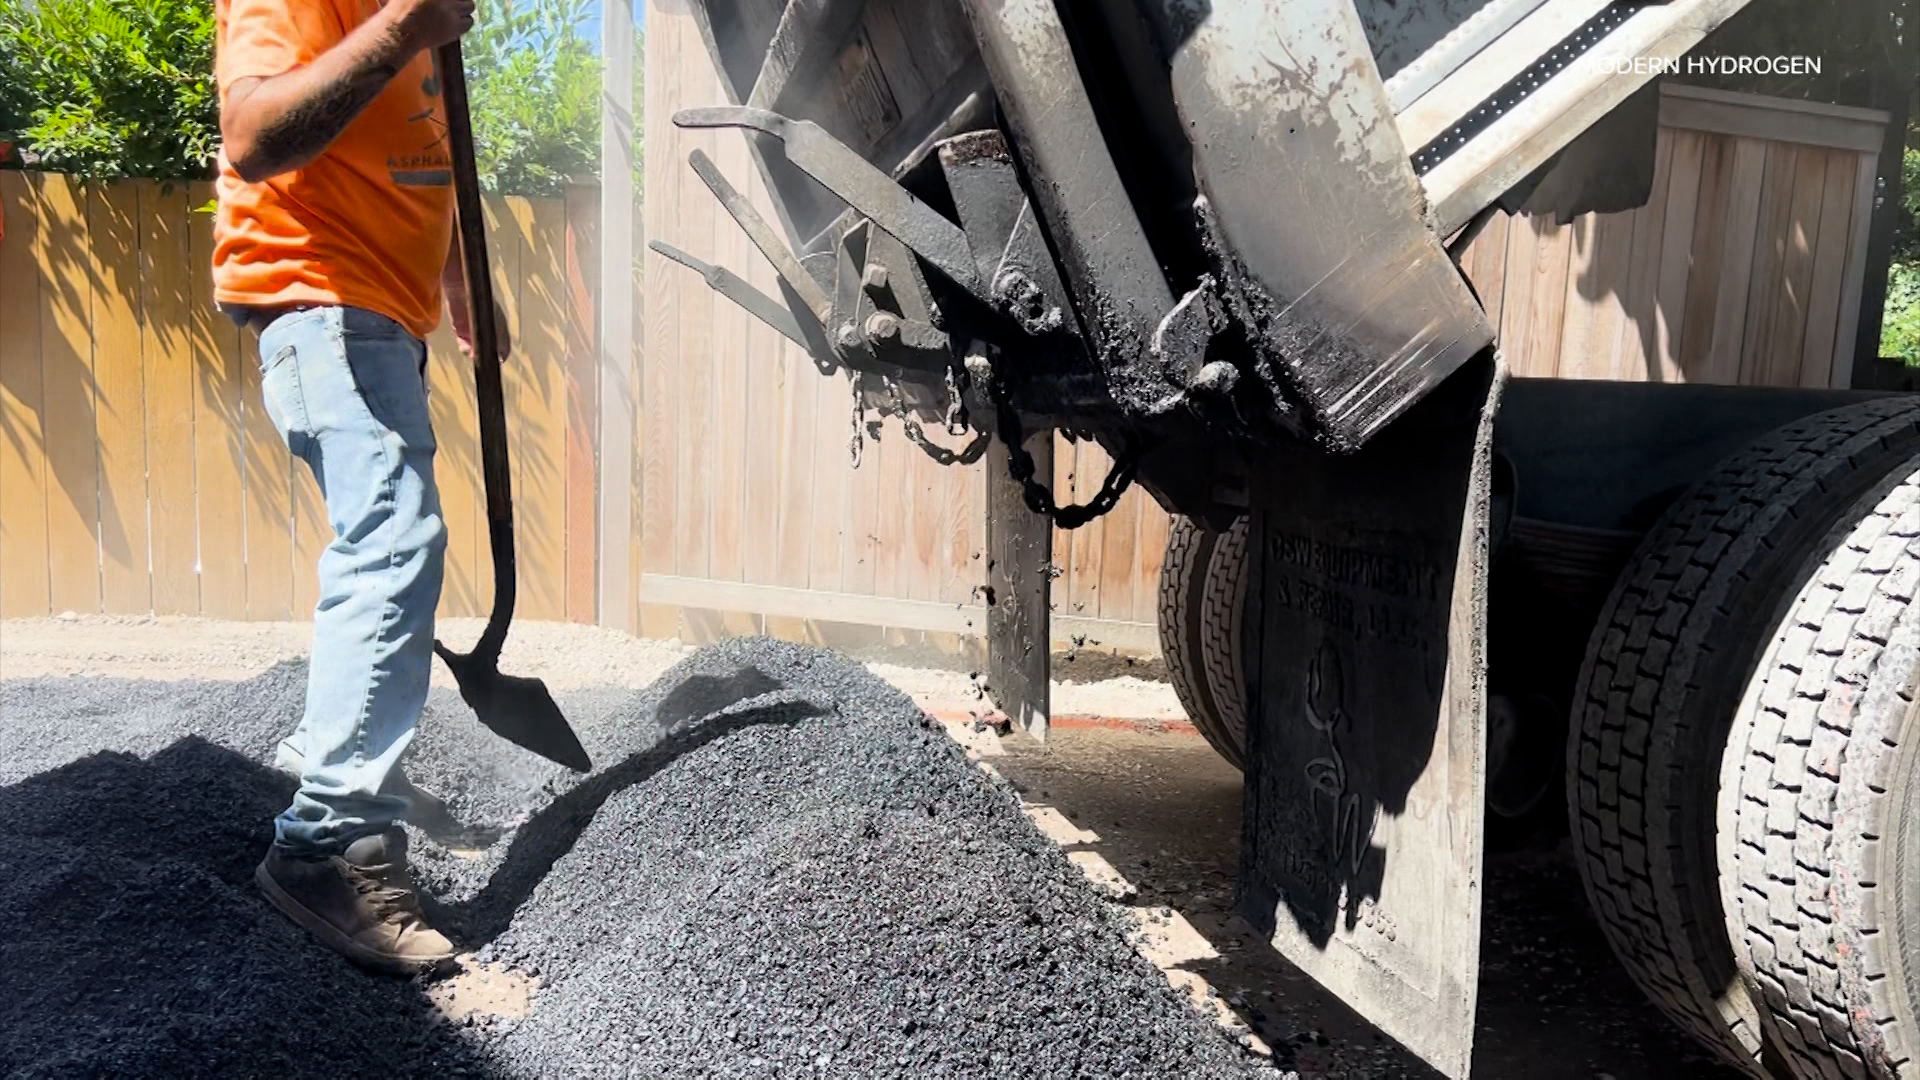 Woodinville's Modern Hydrogen thinks they have a solution to potholes by making heat-resistant asphalt